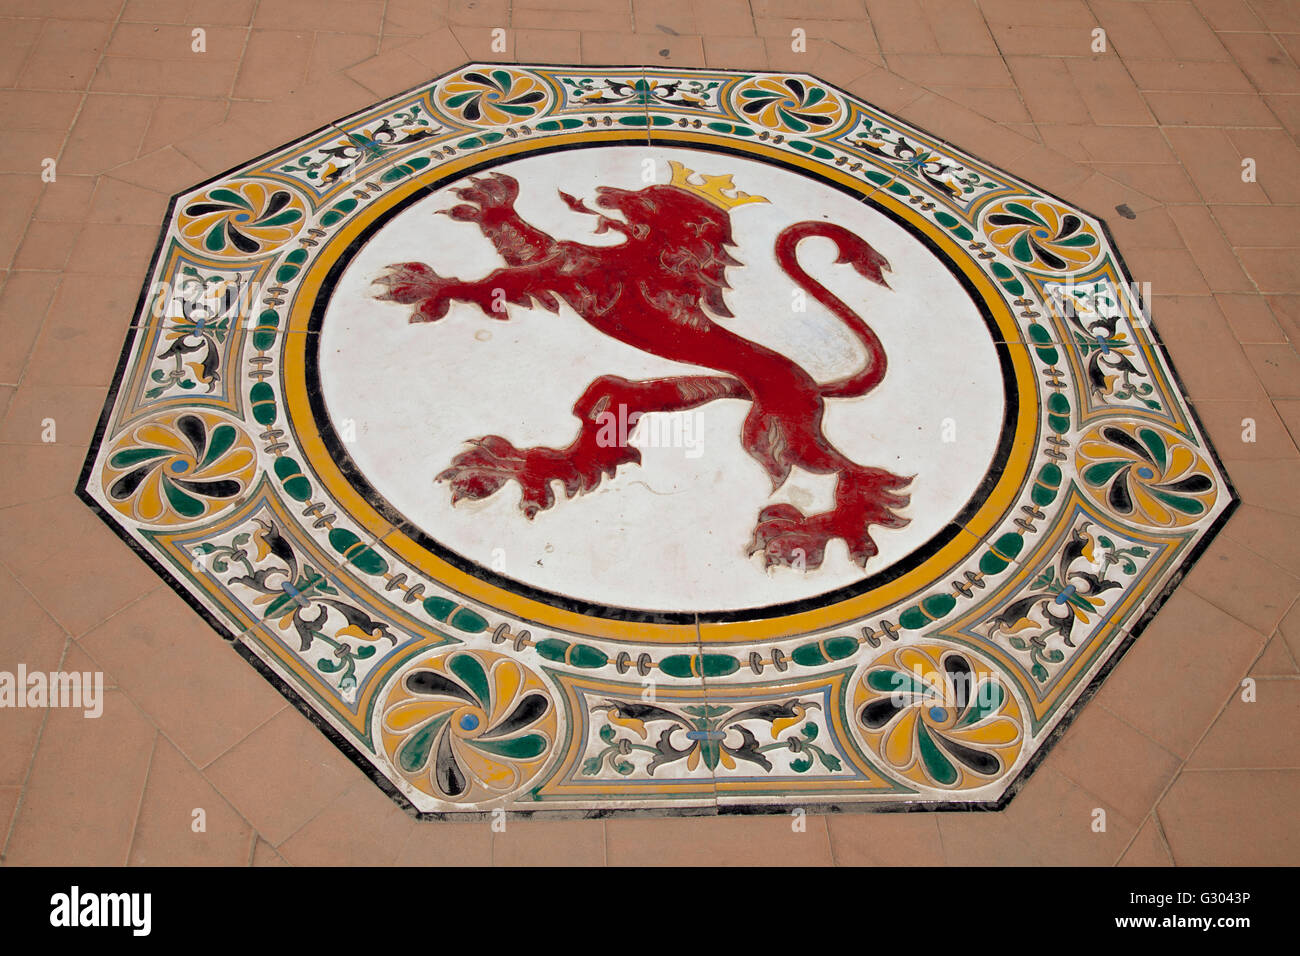 Ceramic figure of a lion on the floor in the Plaza de Espana, Seville, Andalusia, Spain, Europe Stock Photo